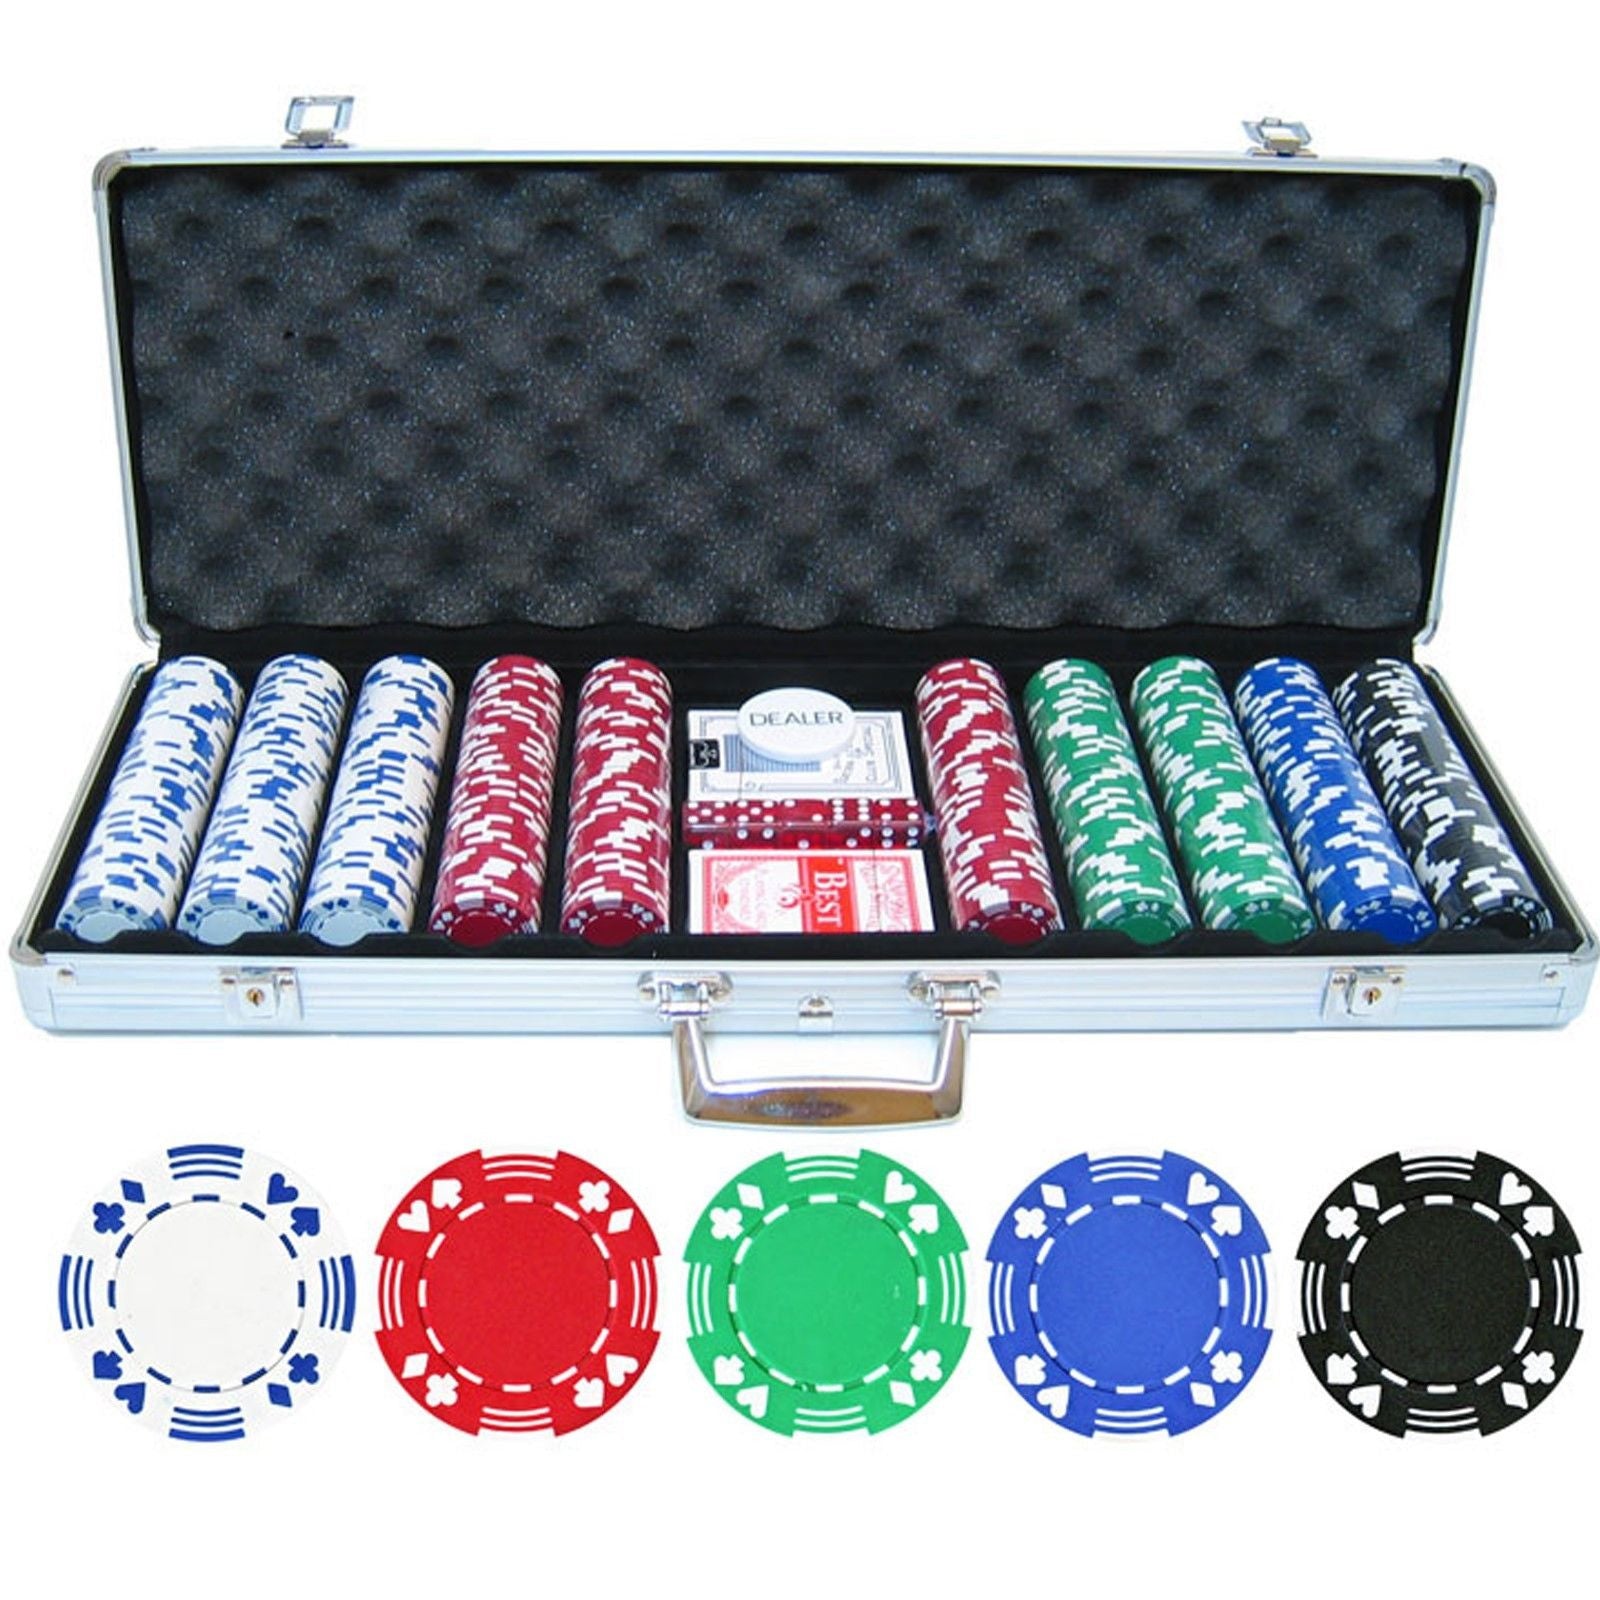 CASINO POKER CHIPS SET TEXAS HOLD EM CARDS GAME IN CASE